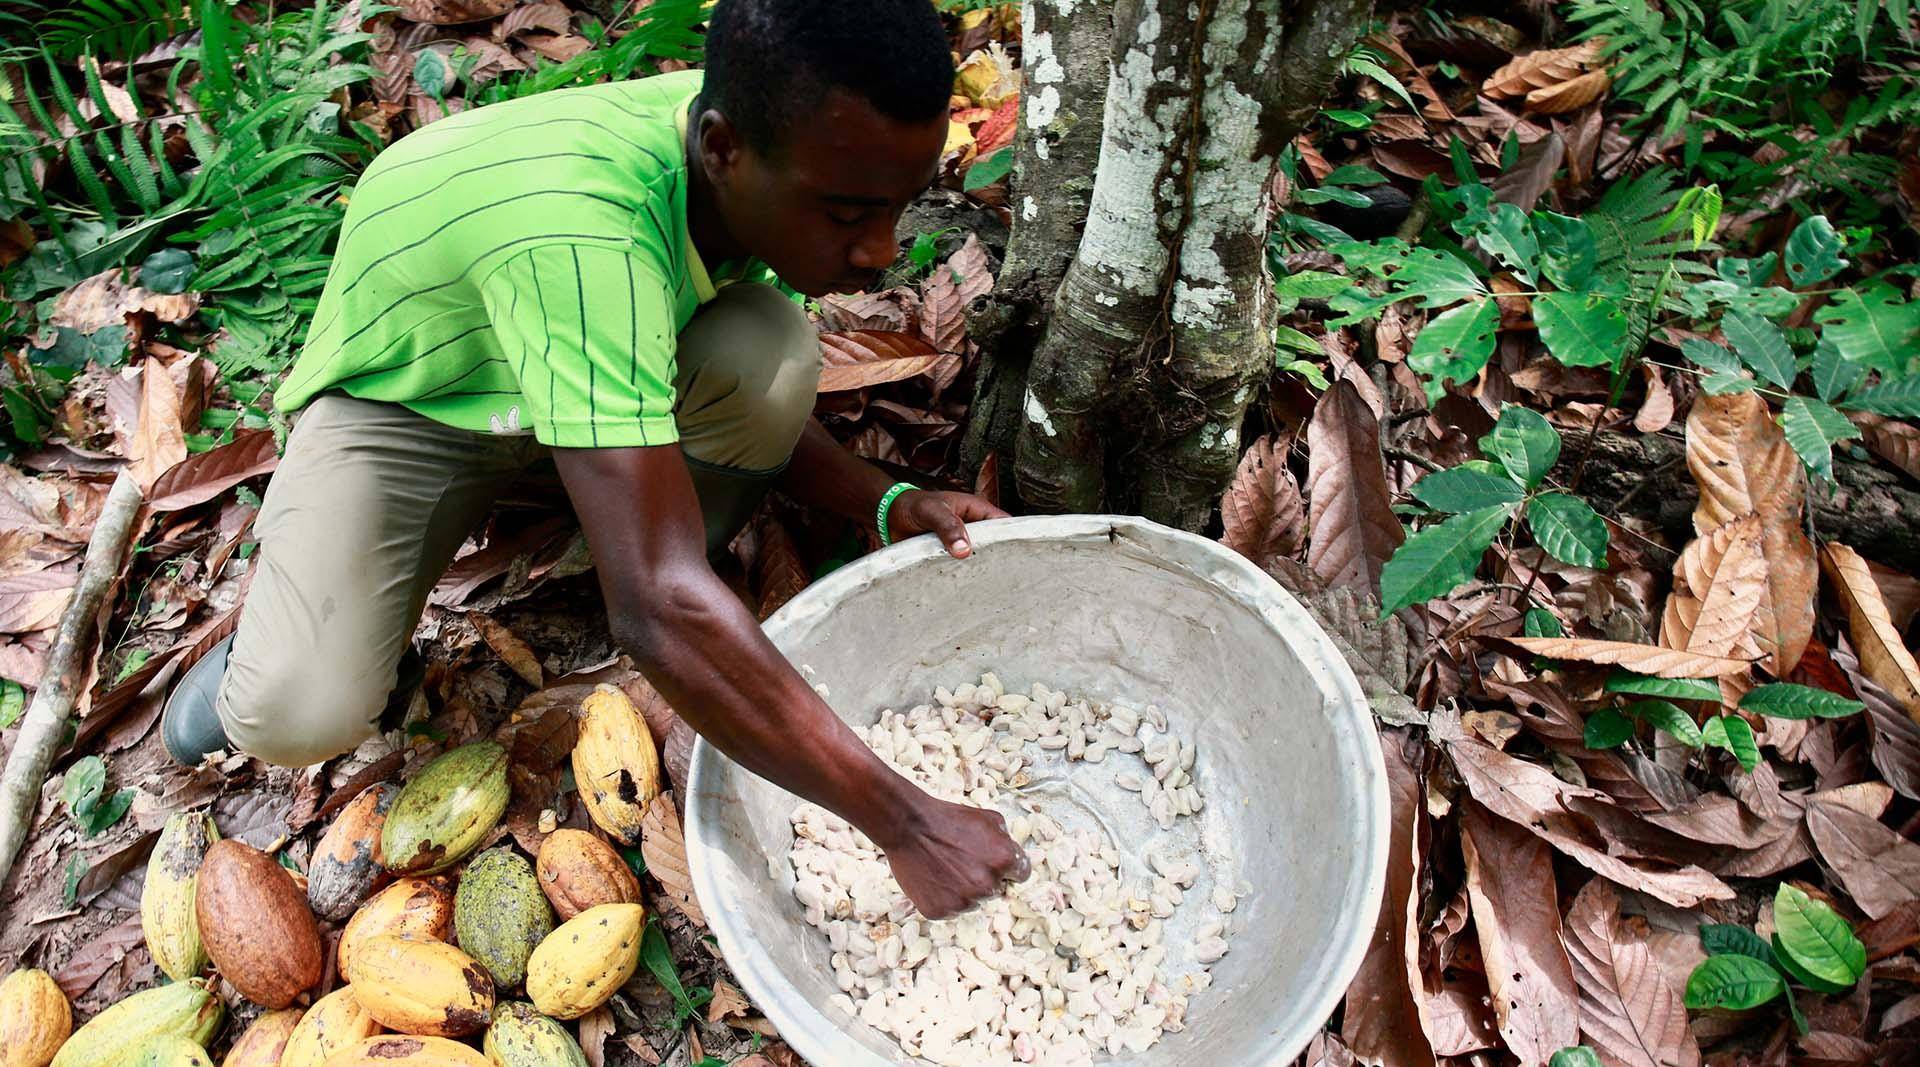 Cocoa beans are the lifeblood of thousands of people in the Ivory Coast and Ghana